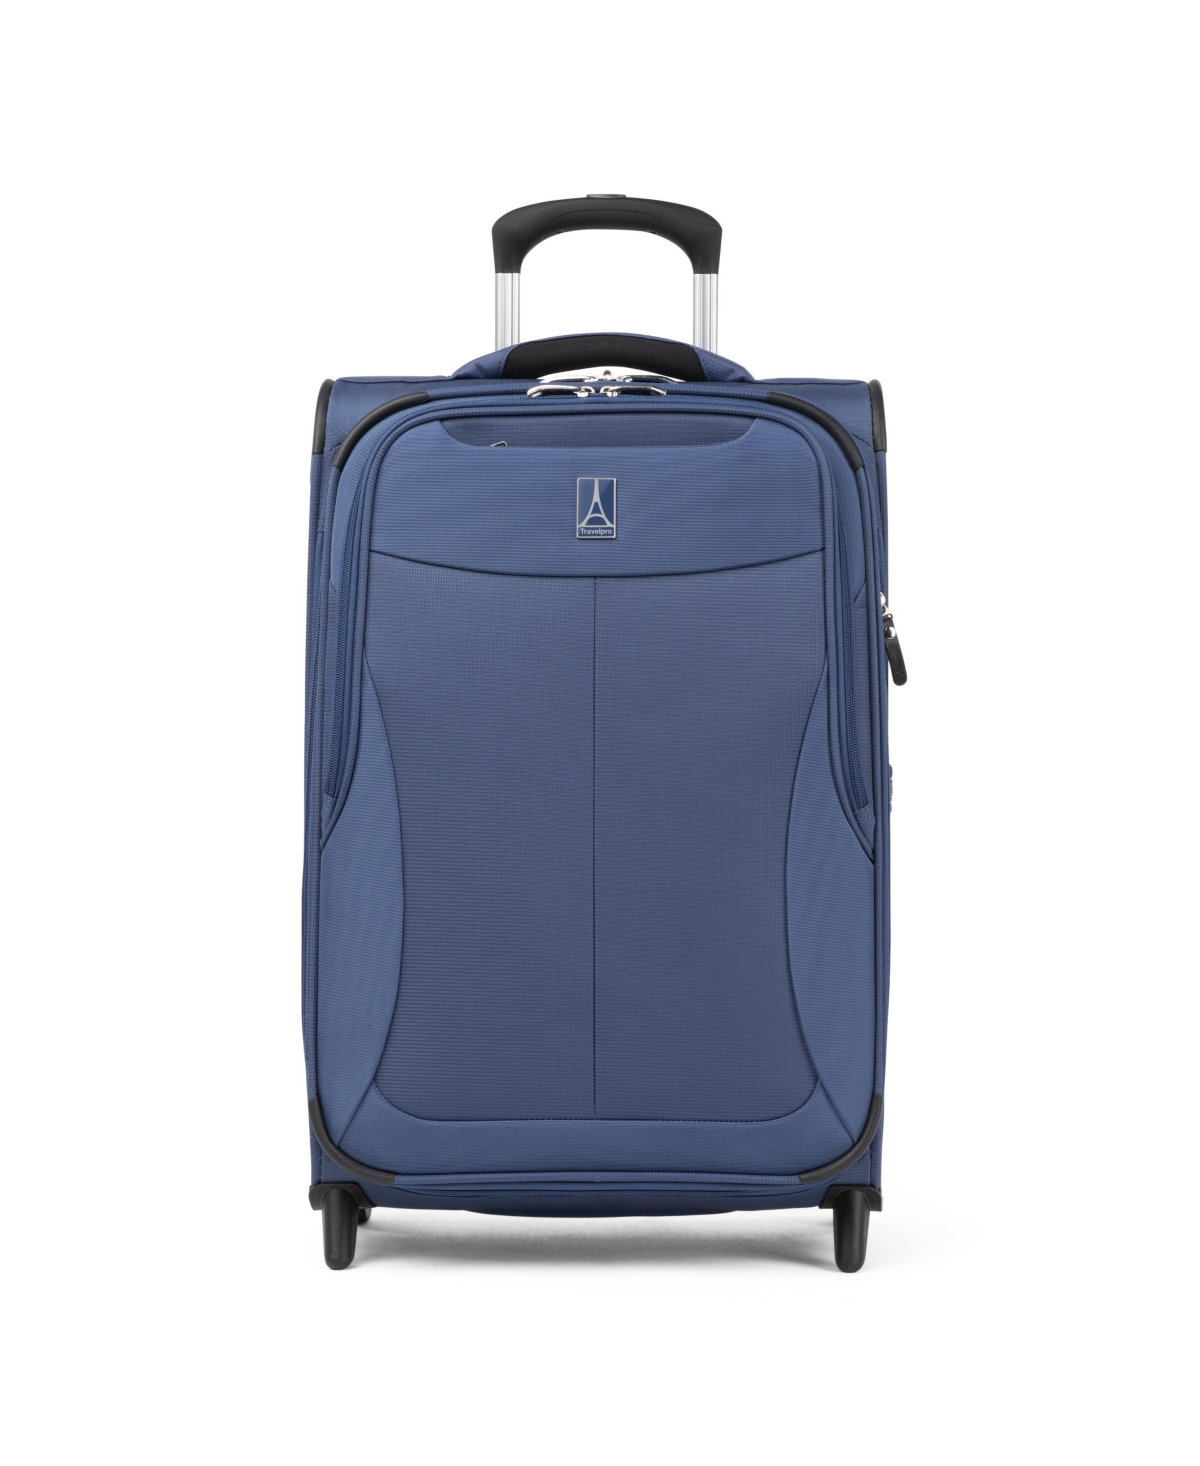 WalkAbout 6 Carry-on Expandable Rollaboard, Created for Macy's - Ocean Blue